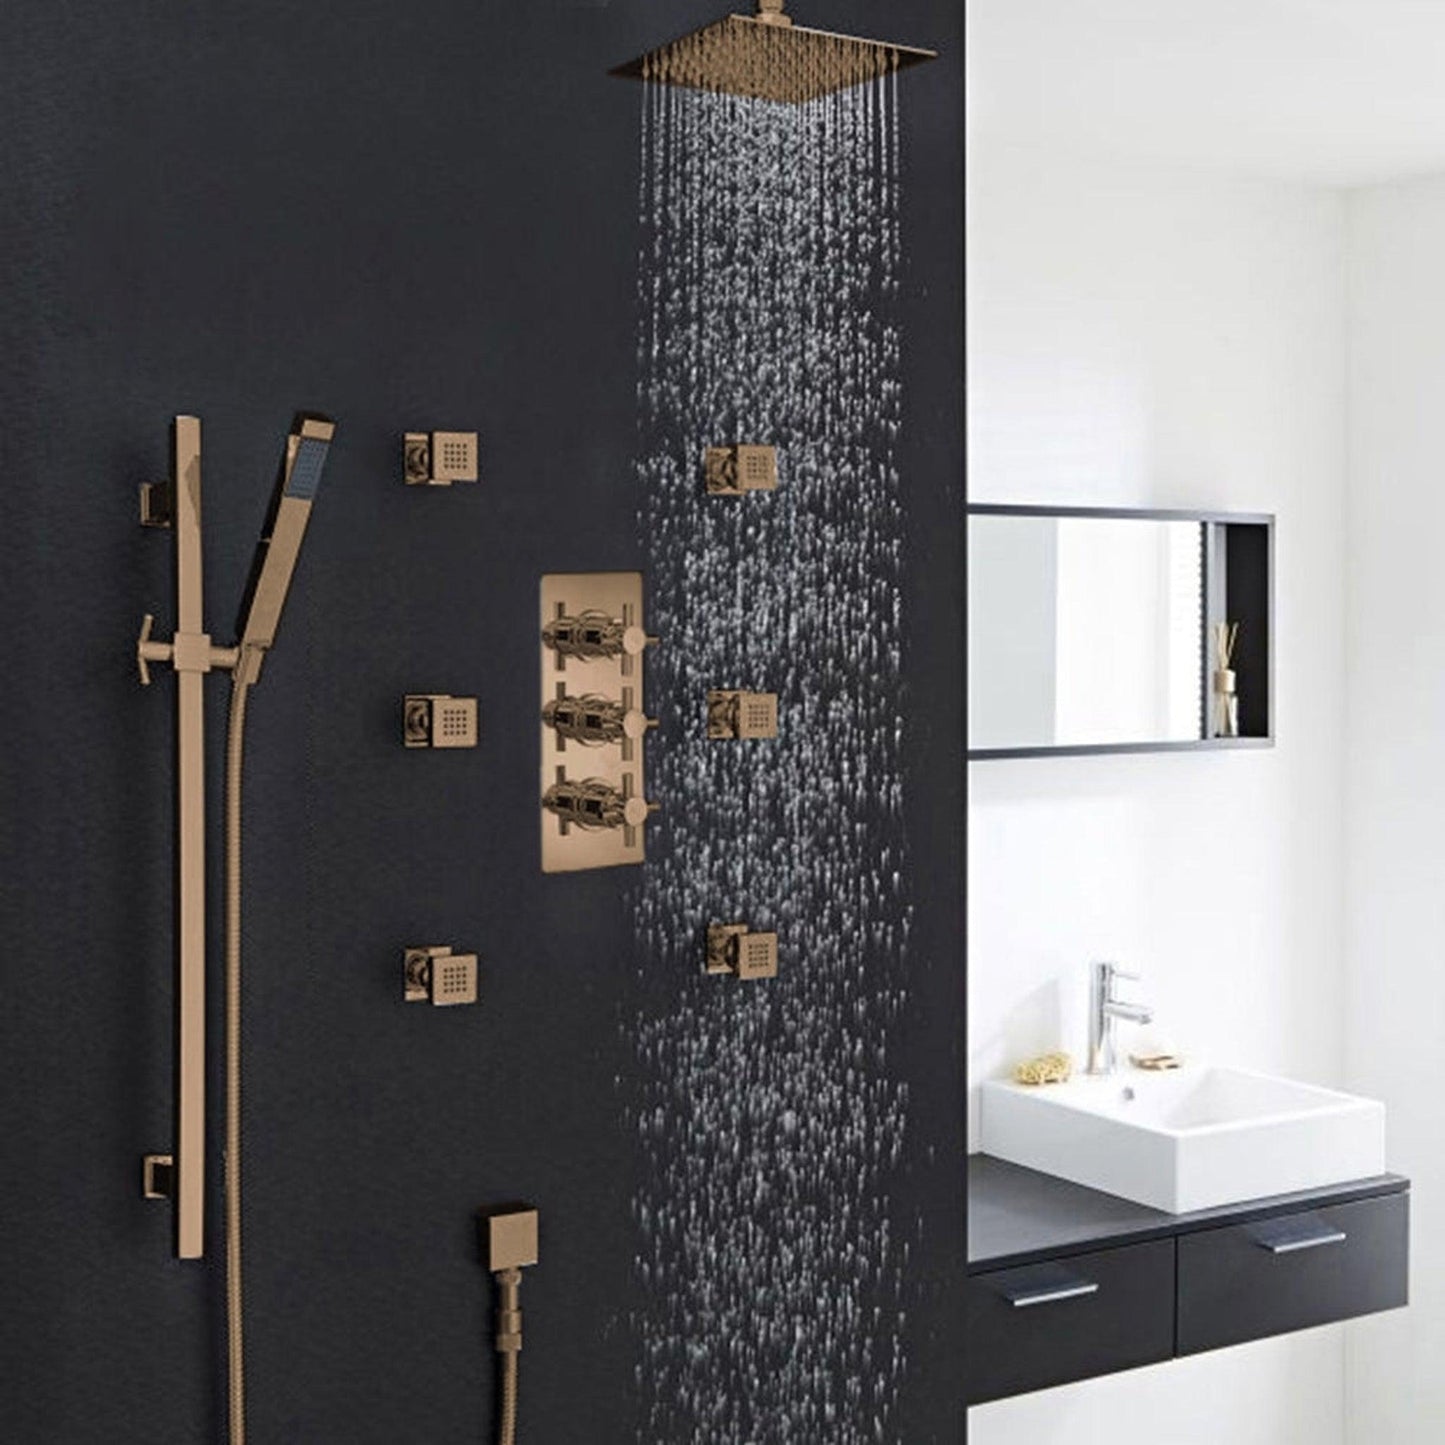 Fontana Reno 16" Oil Rubbed Bronze Square Ceiling Mounted Rainfall Shower System With 6-Body Massage Jets and Hand Shower